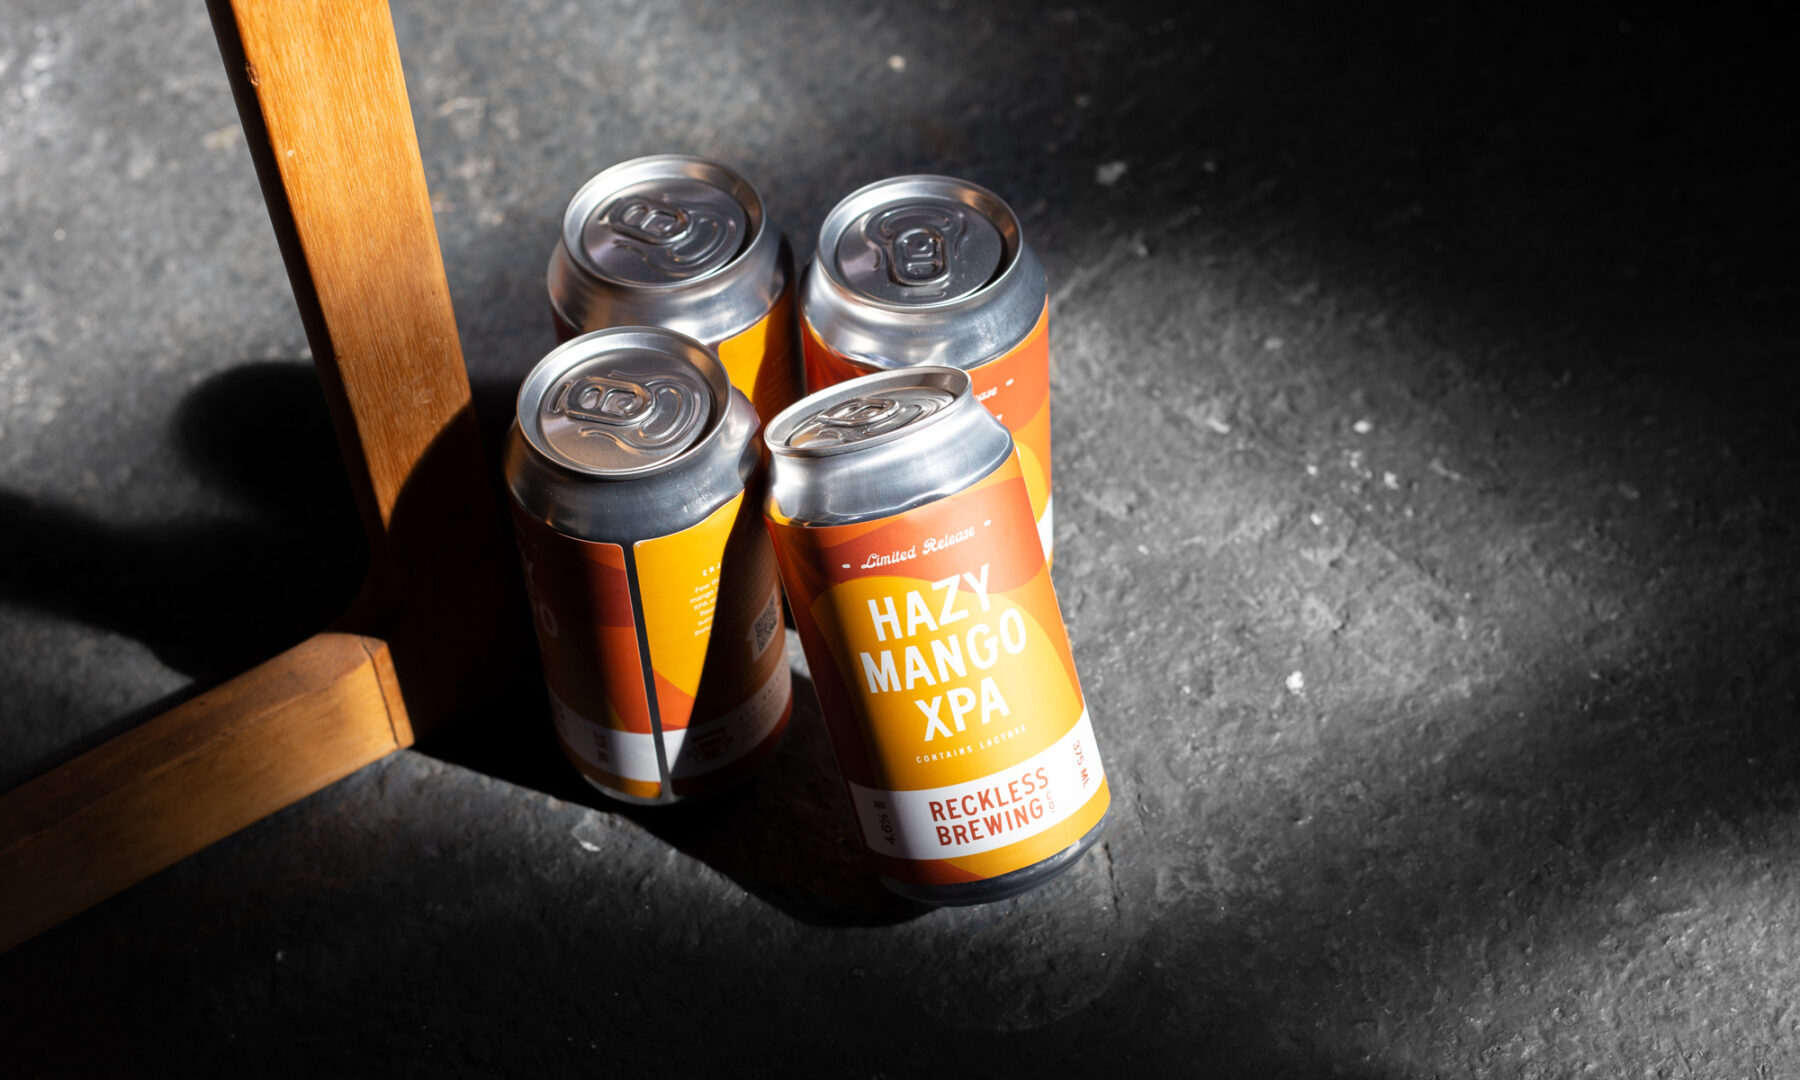 4 Reckless Brewing Hazy Mango XPA cans on industrial background